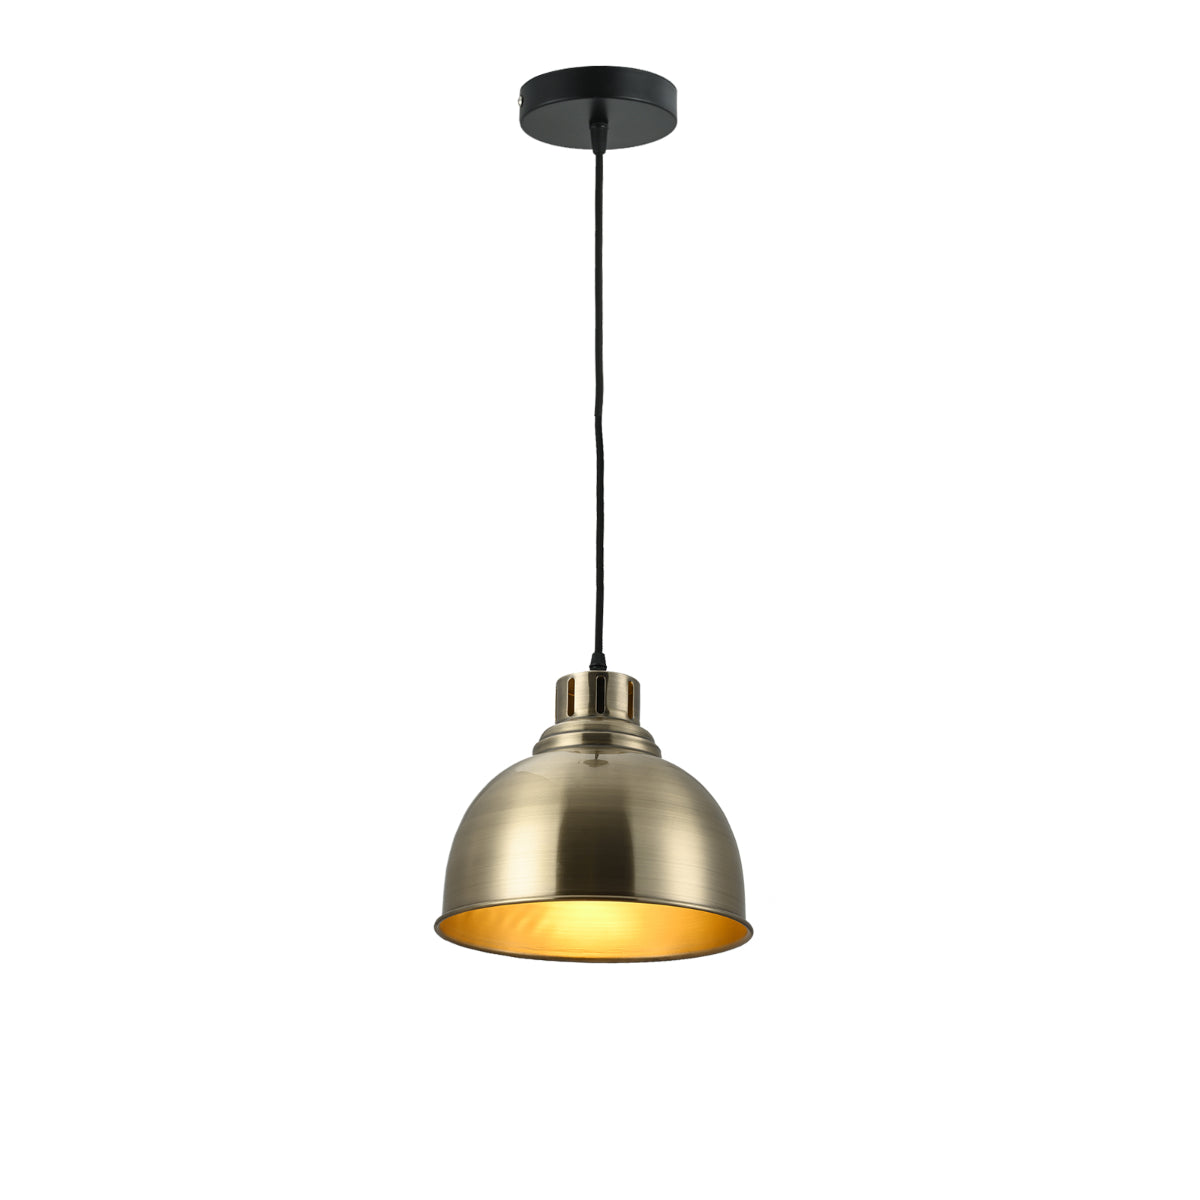 Main image of Timeless Classic Dome Pendant Light 150-18443